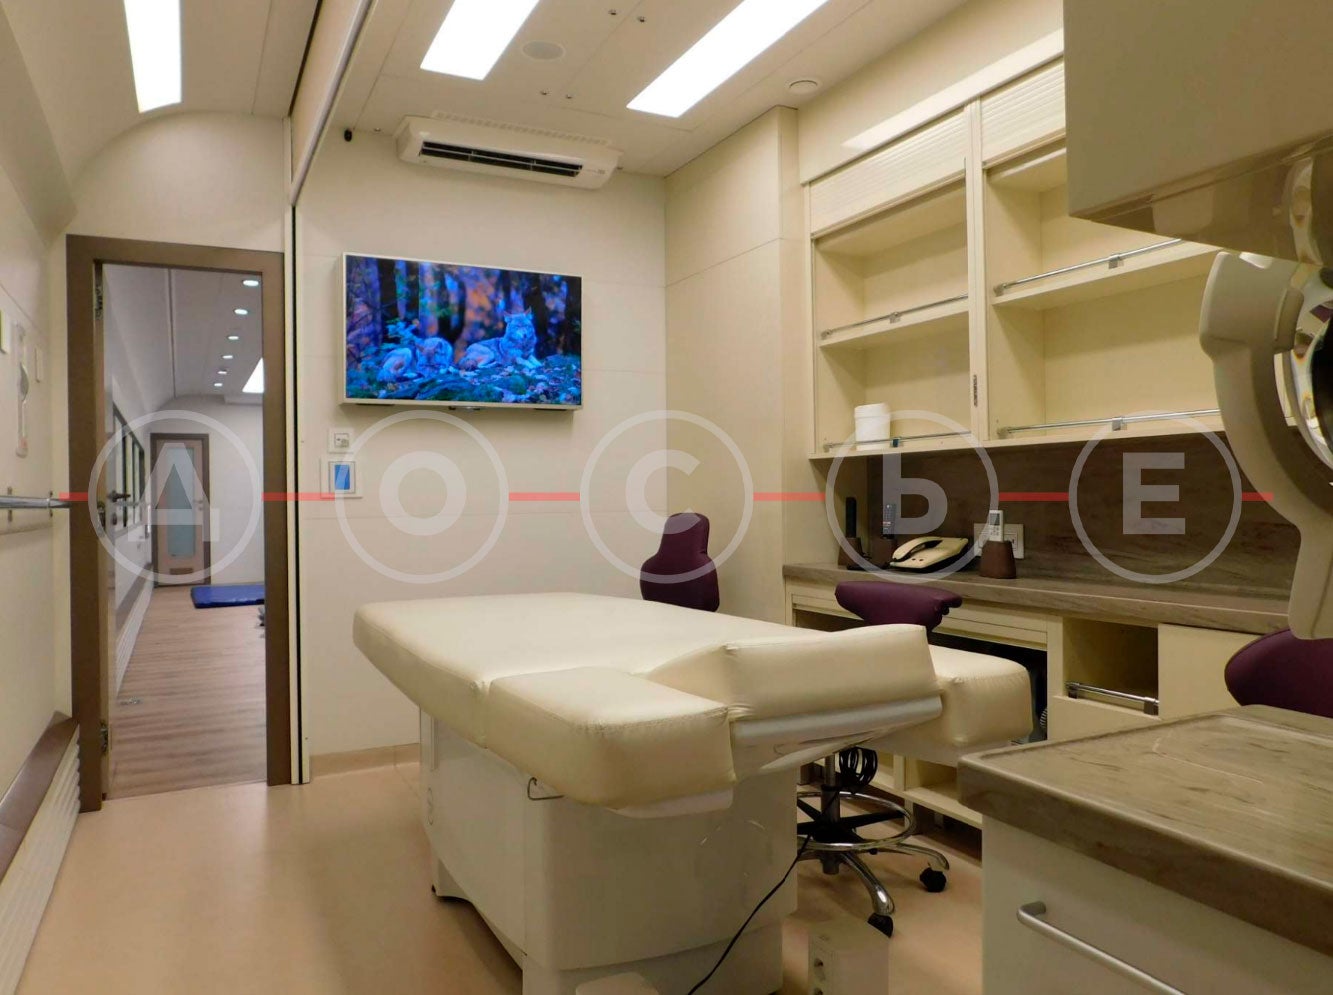 The medical suite includes a lung ventilator, defibrillator and a patient monitor